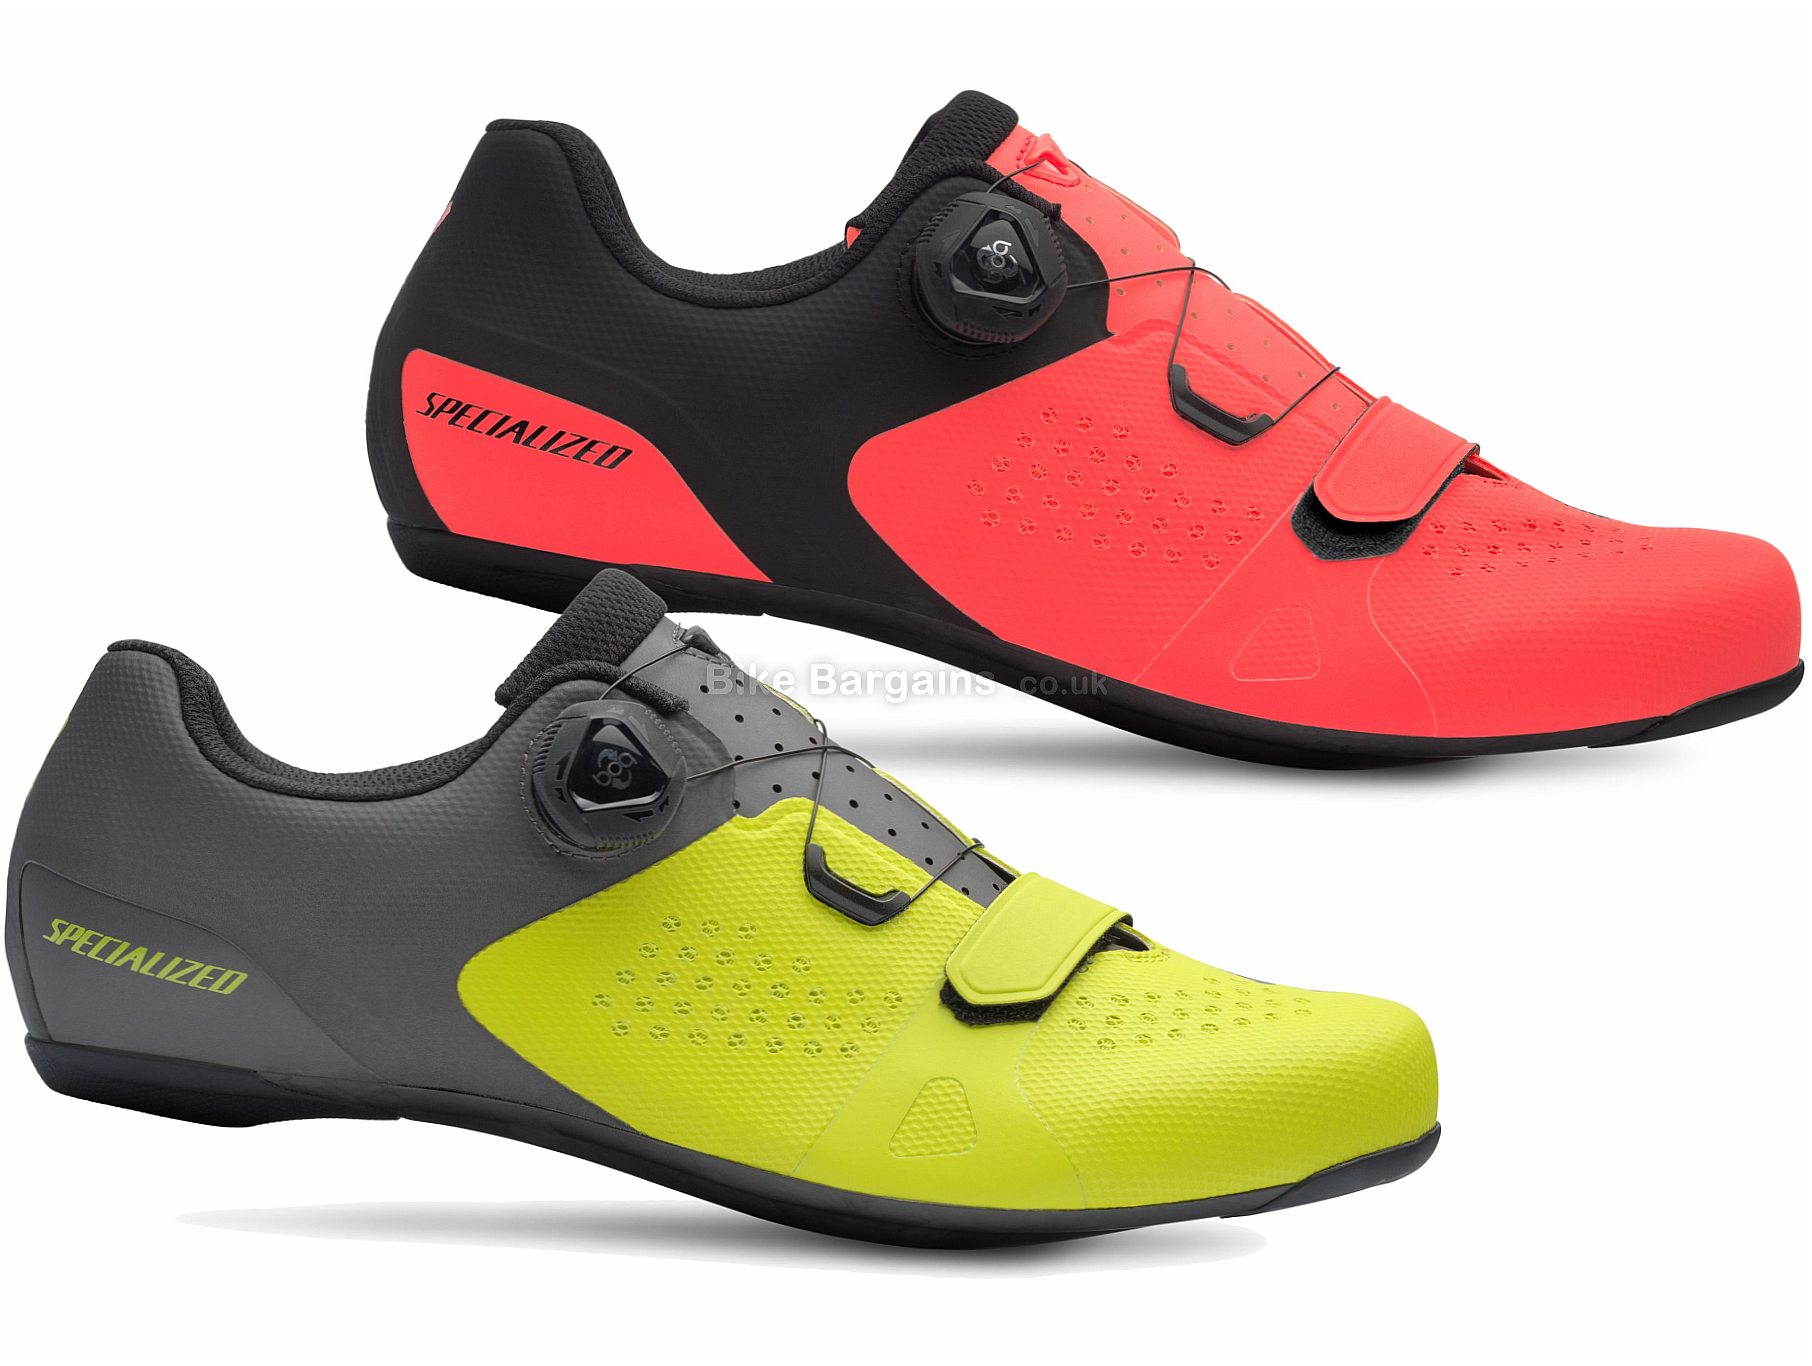 Specialized Torch 2.0 Road Shoes 2019 